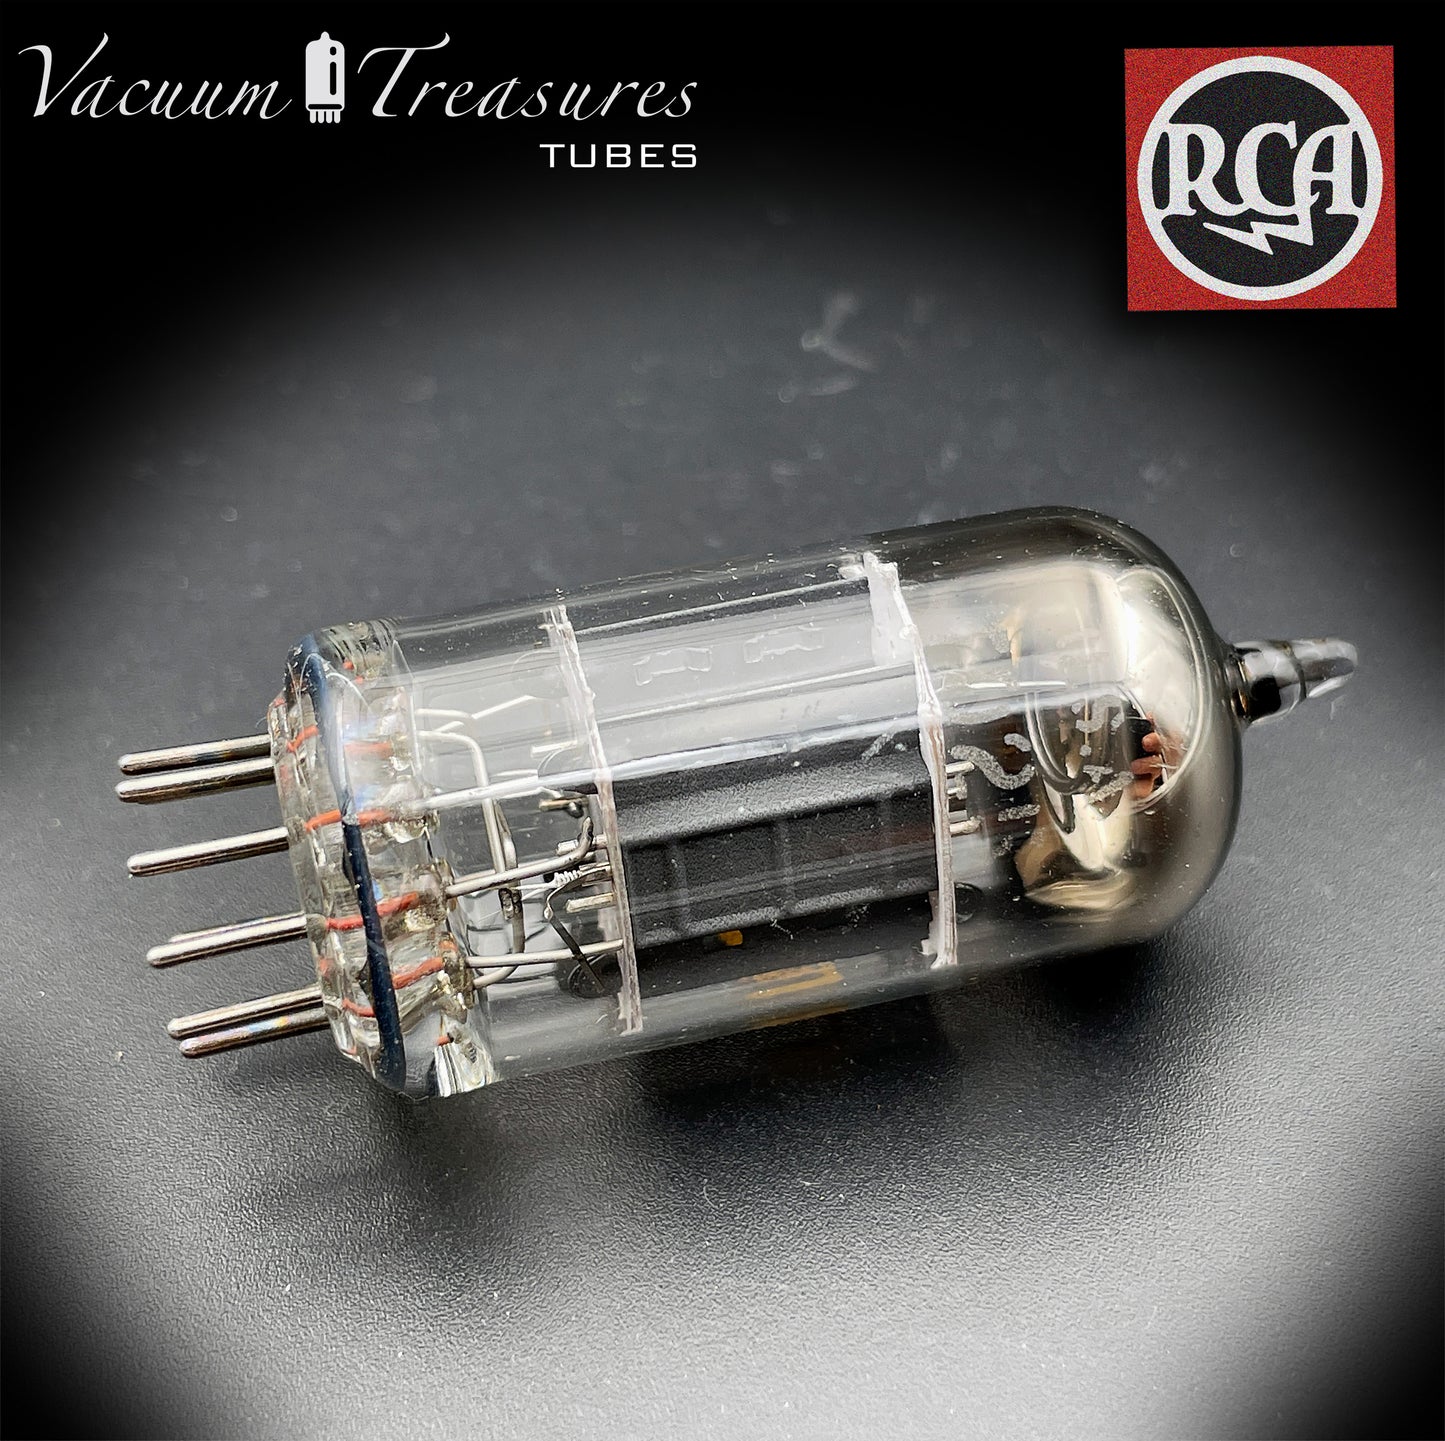 7025 ( 12AX7 ECC83 ) RCA Short Plates O Getter Low Noise & Microphonics Tested Tube MADE IN USA